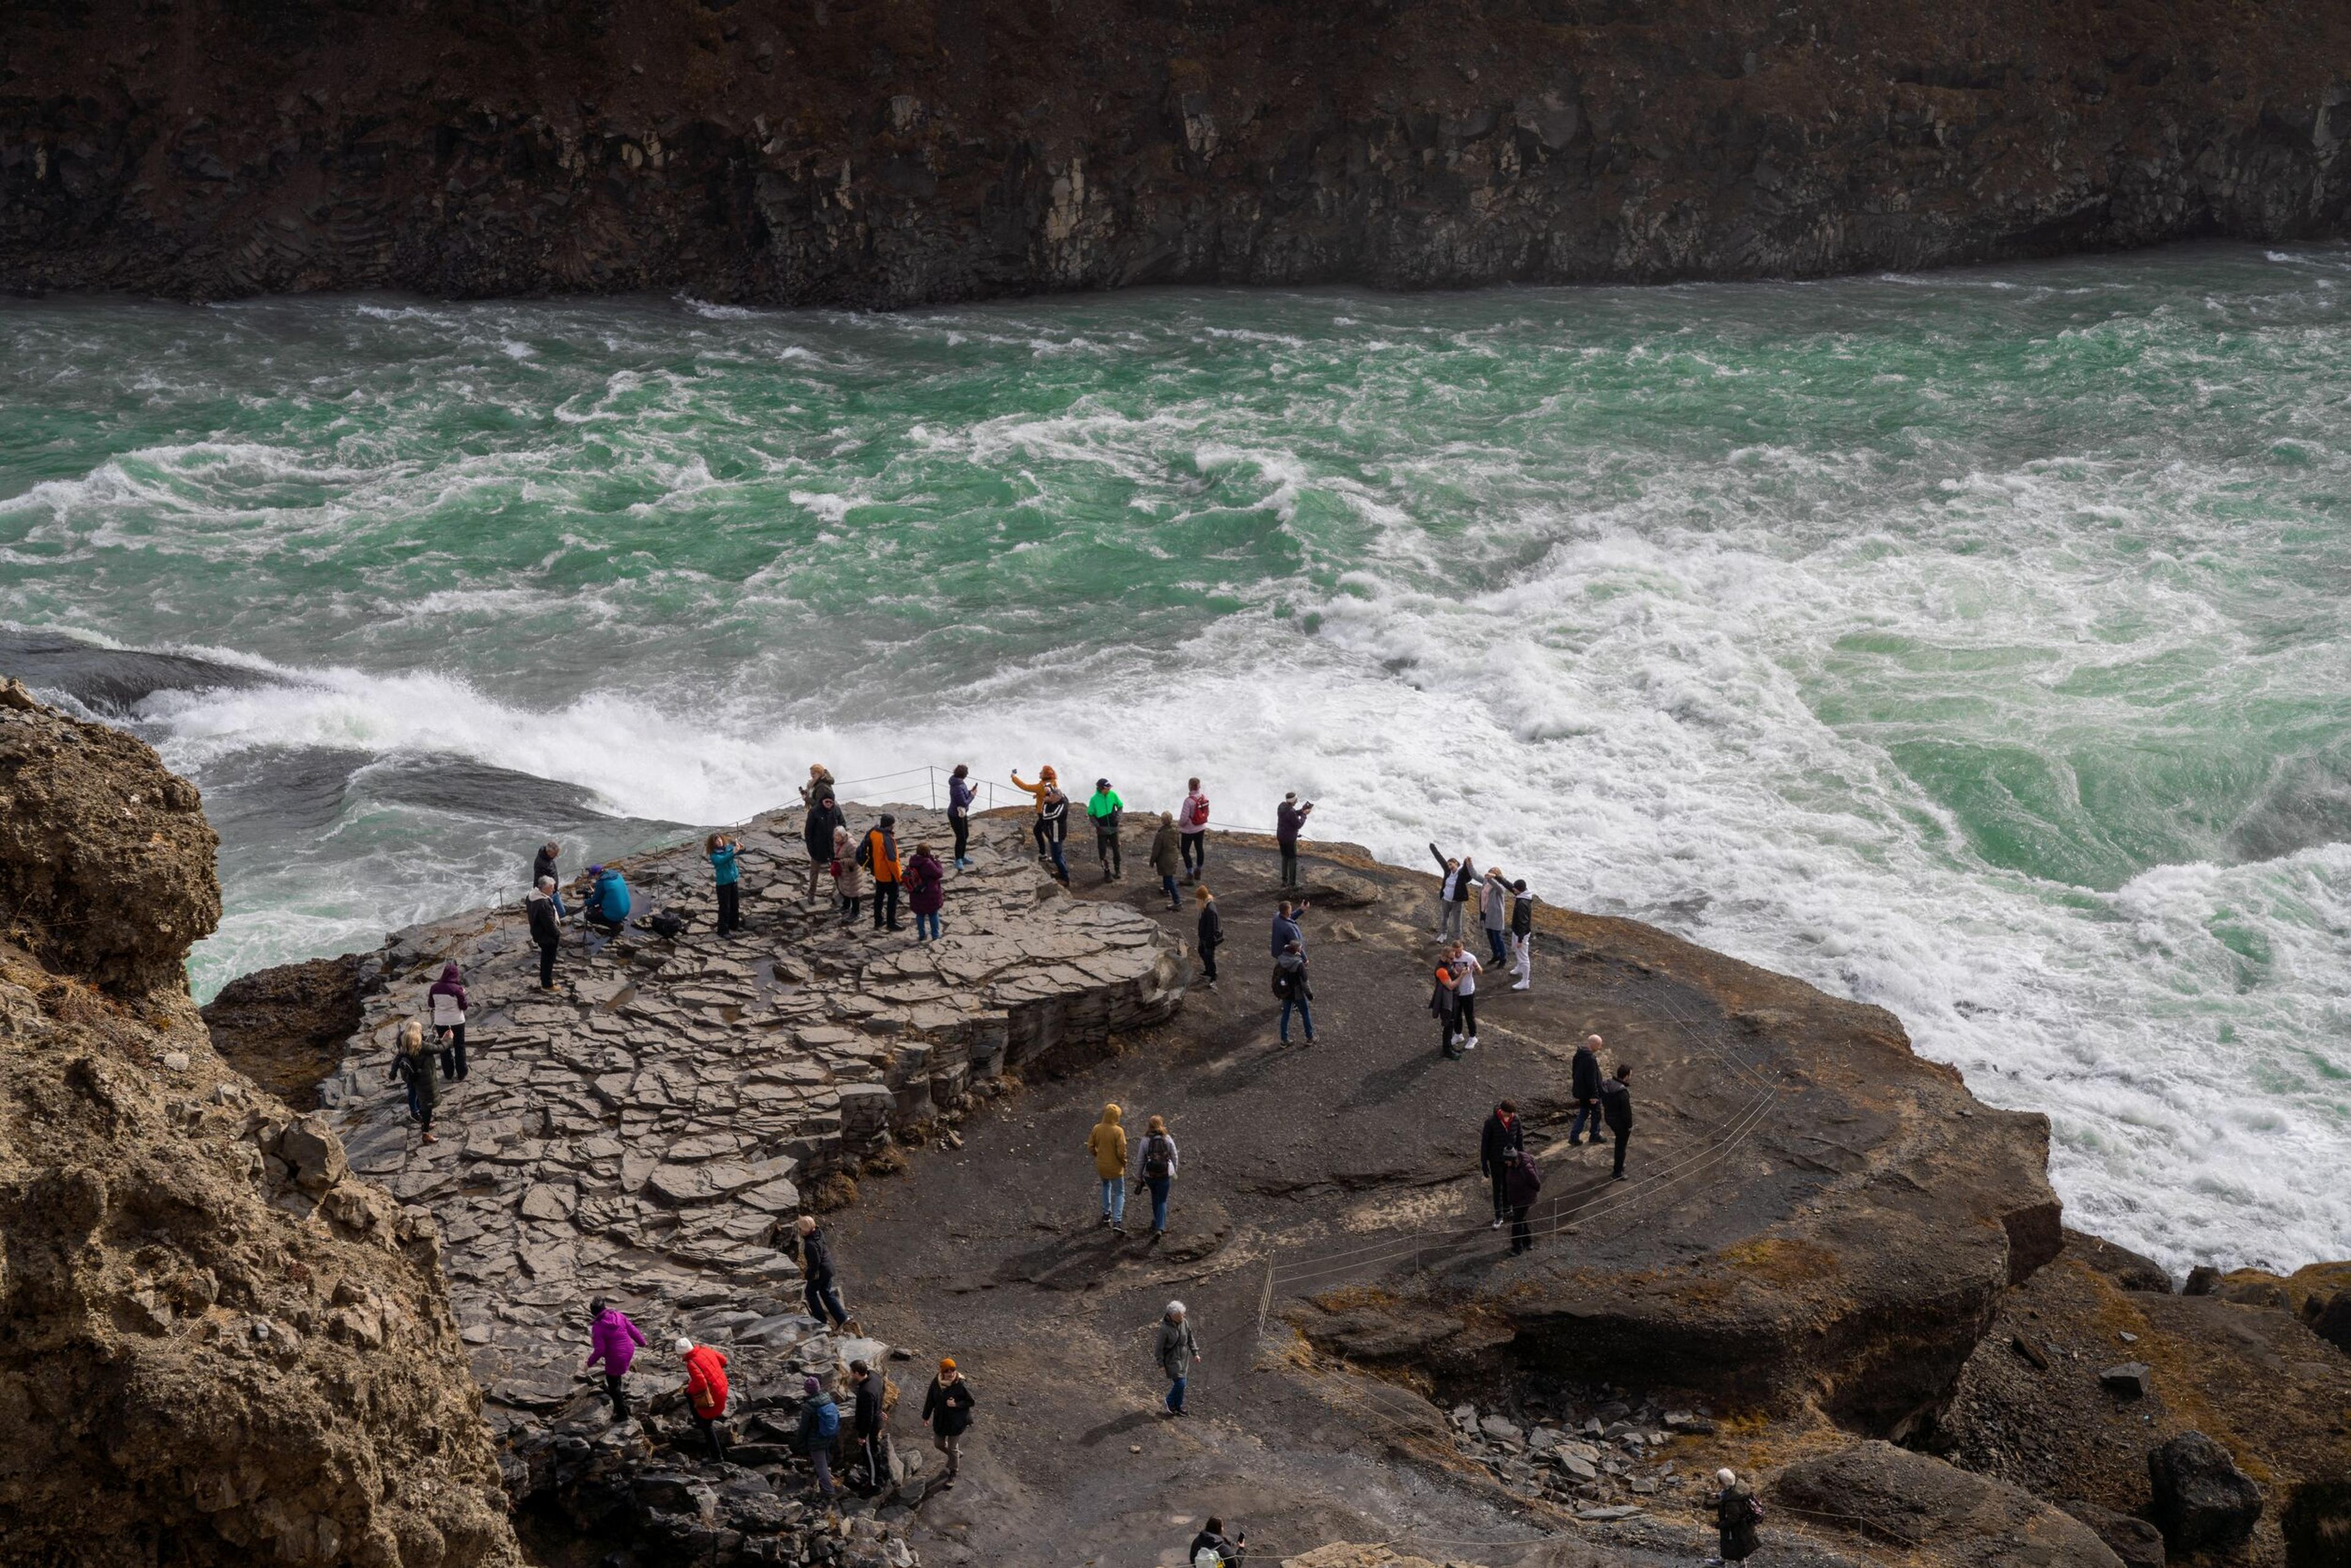 Tourists gathered near the edge of Gullfoss waterfall in Iceland, taking photos and enjoying the powerful, rushing waters.